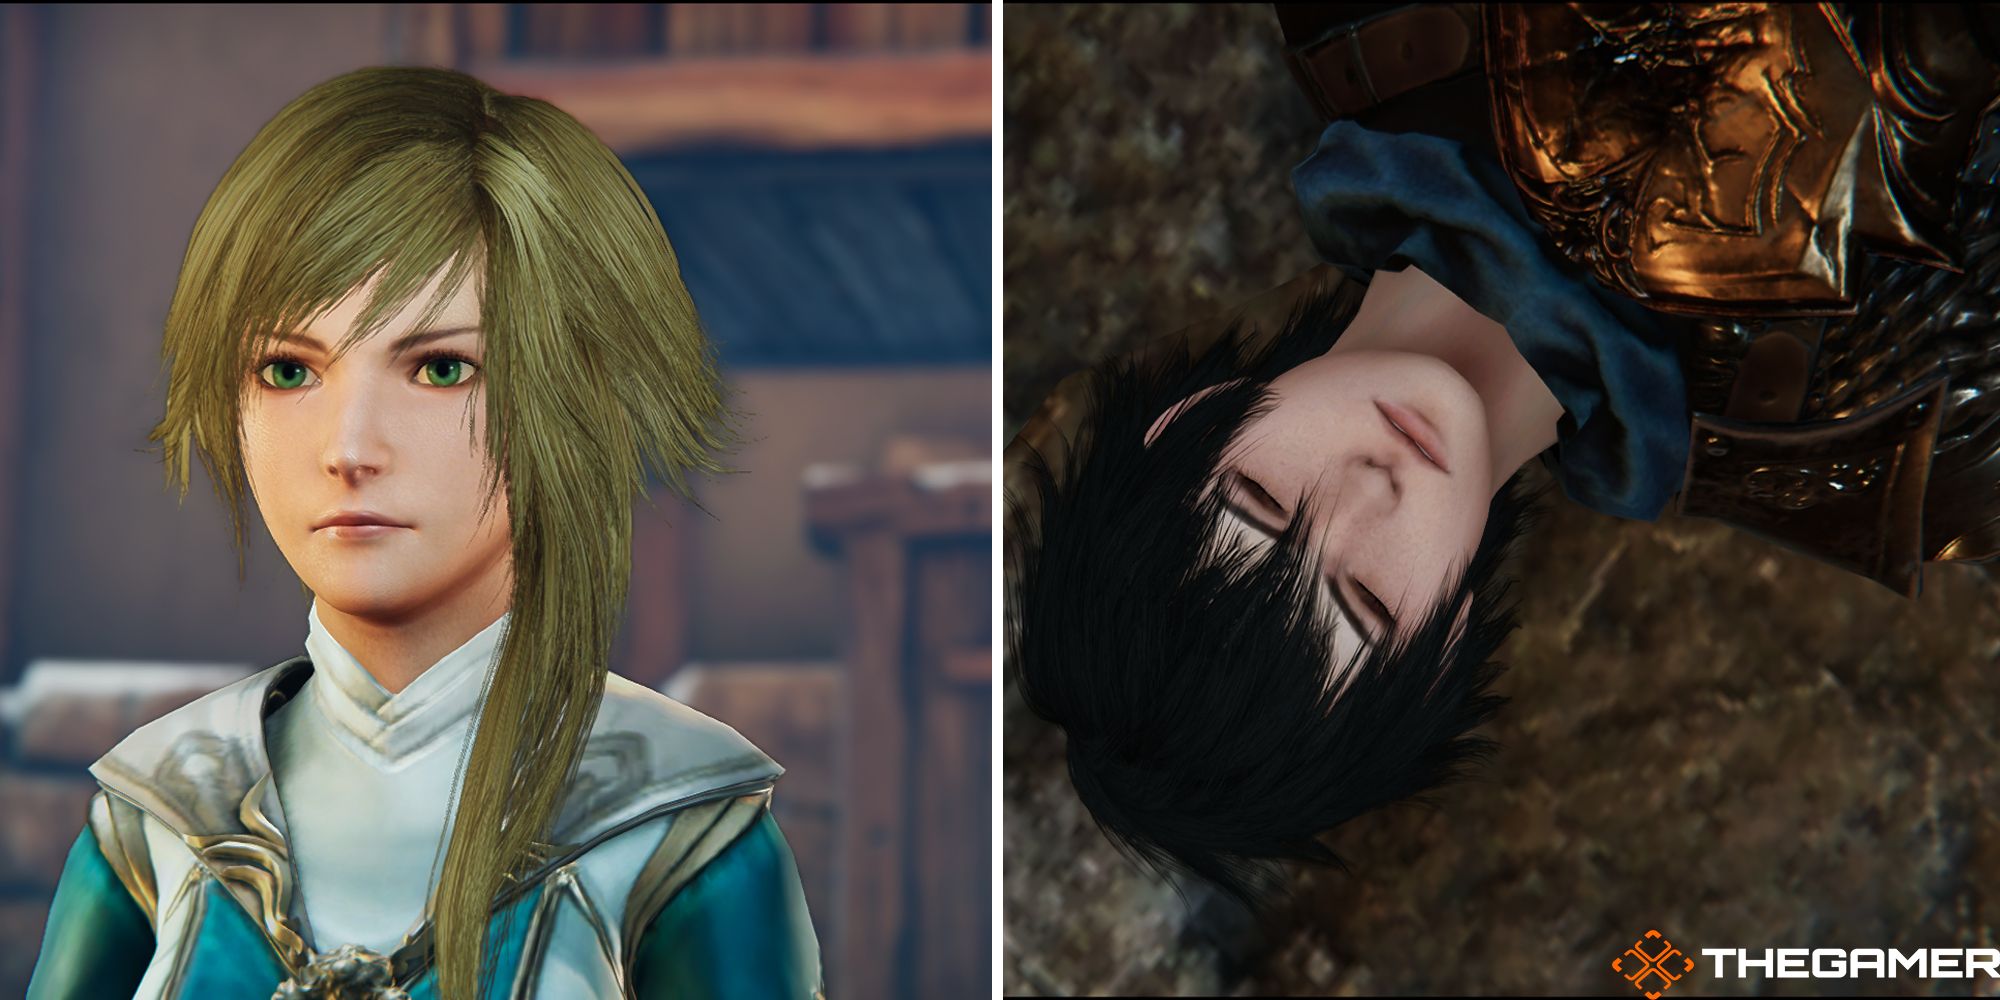 Selene contemplates on the mountaintop outside of Inel, her childhood home, in Edge of Eternity (left). Daryon lies unconscious in the rubble of the mysterious Ascendance ritual in Edge of Eternity (right).